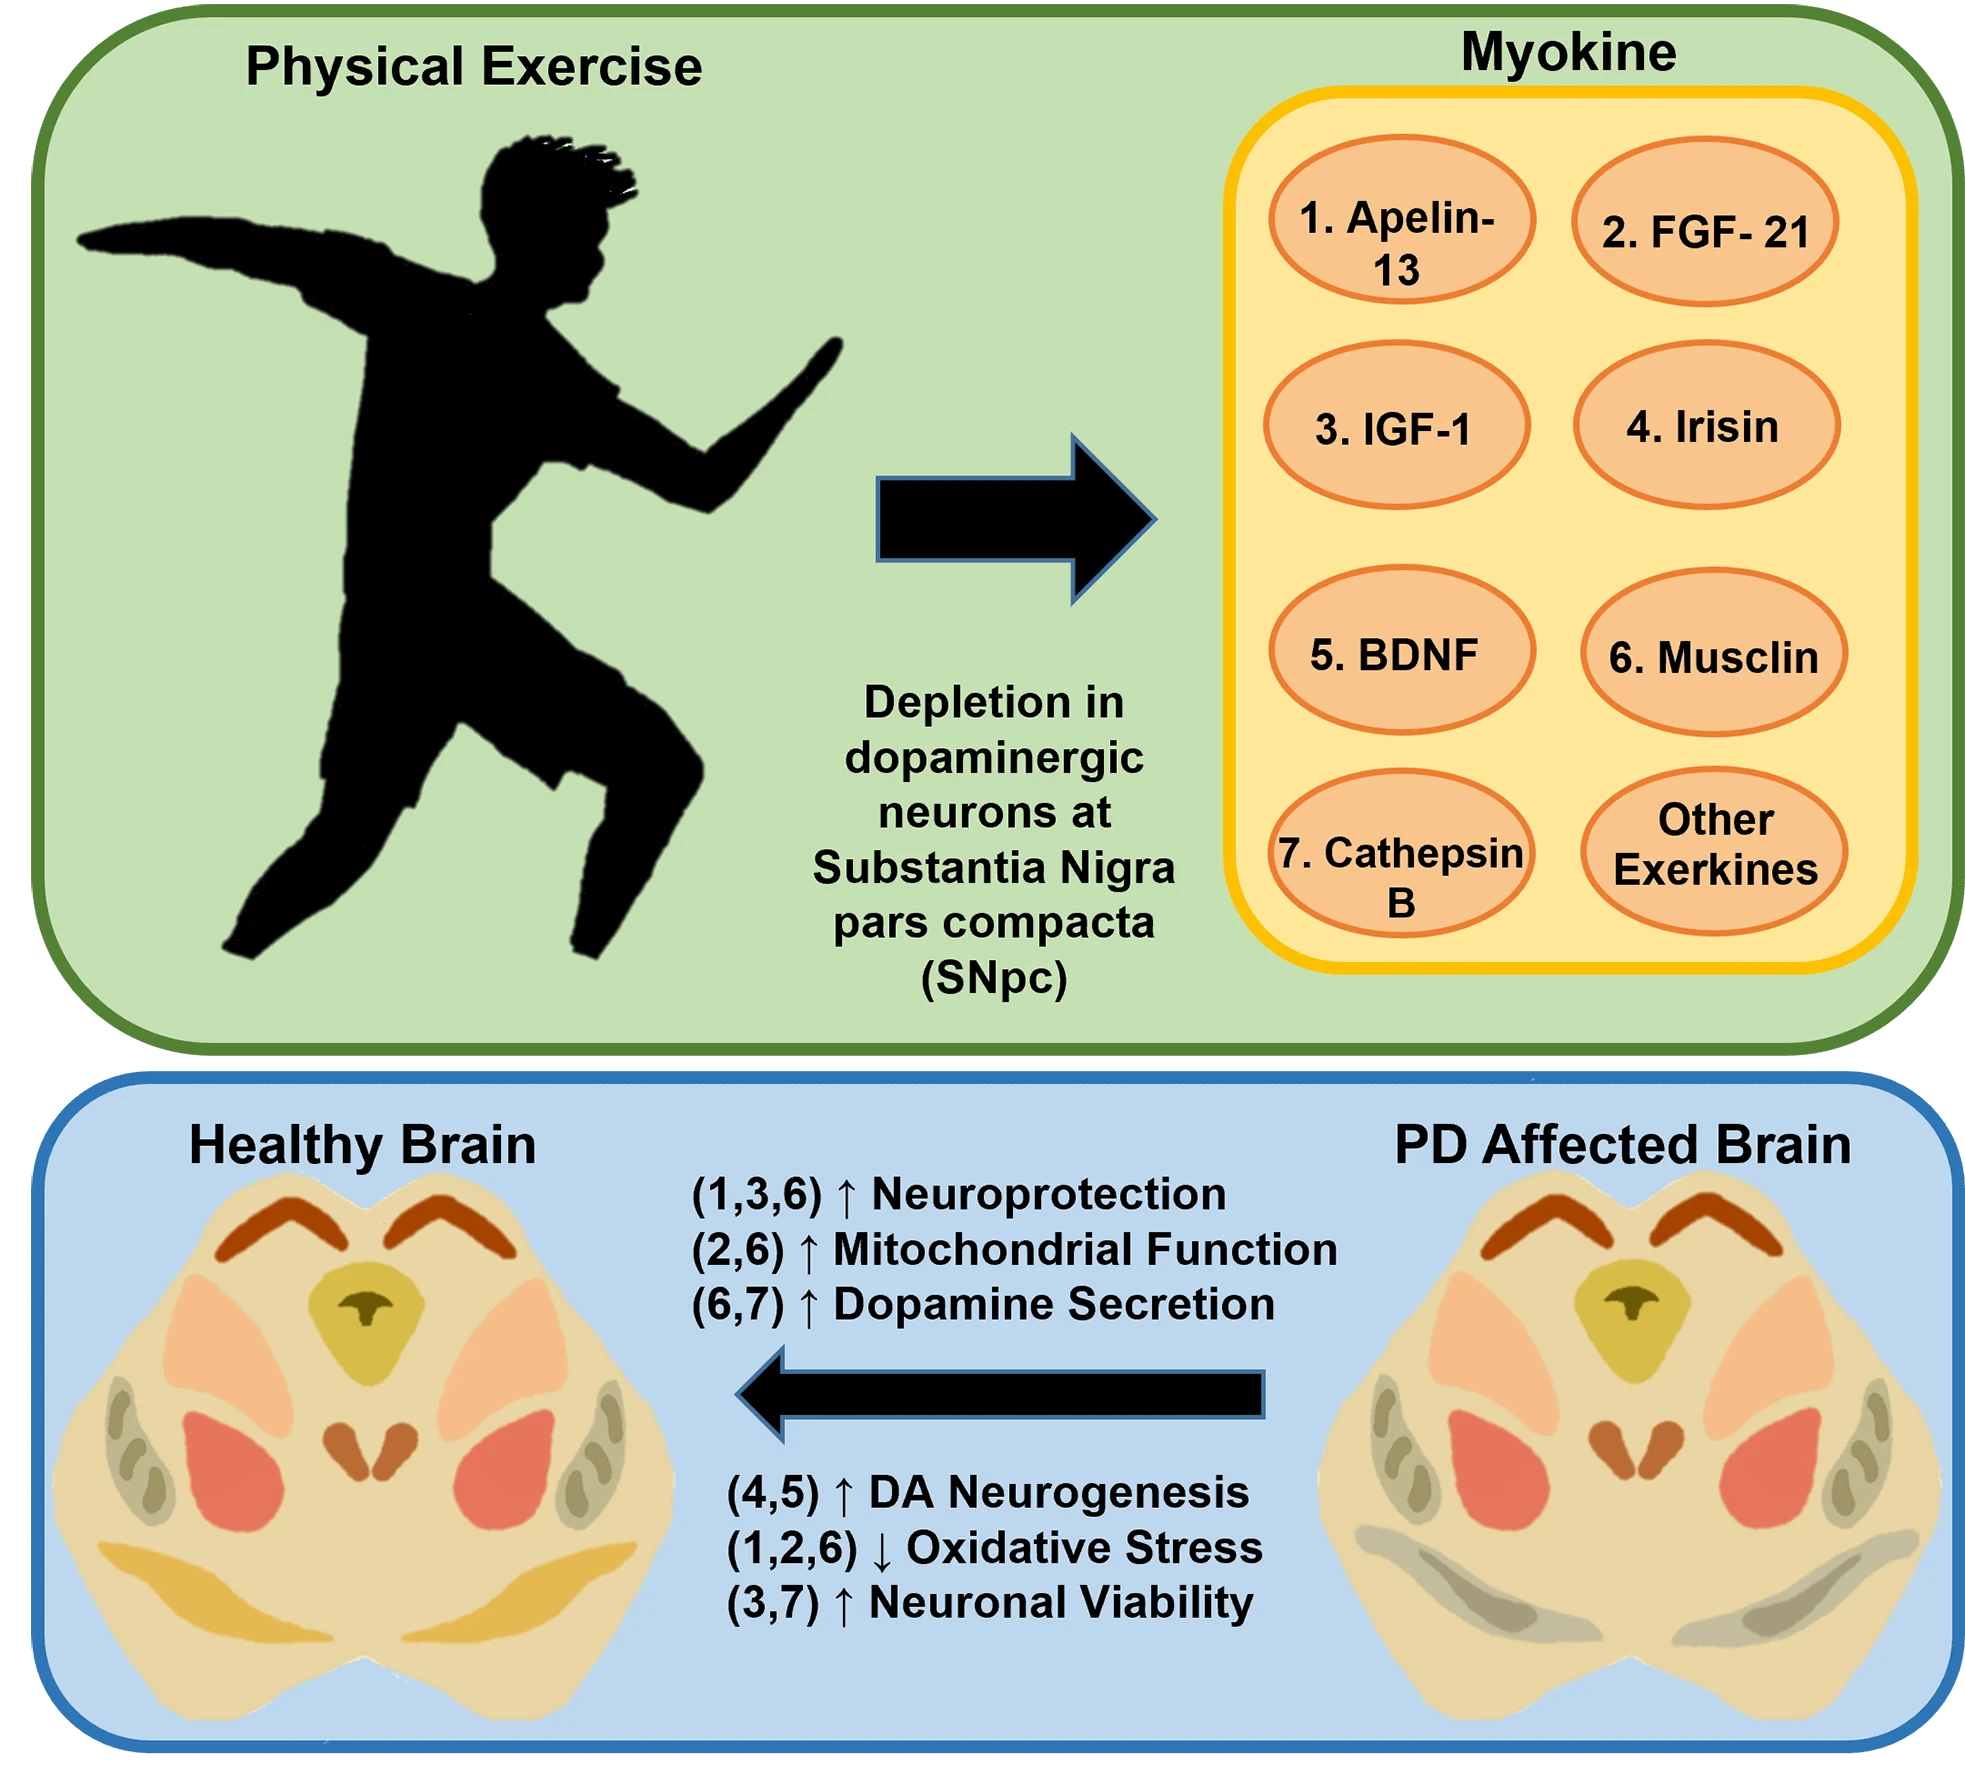 Exercise and exerkine upregulation: Brain-derived neurotrophic factor as a potential non-pharmacological therapeutic strategy for Parkinson’s disease